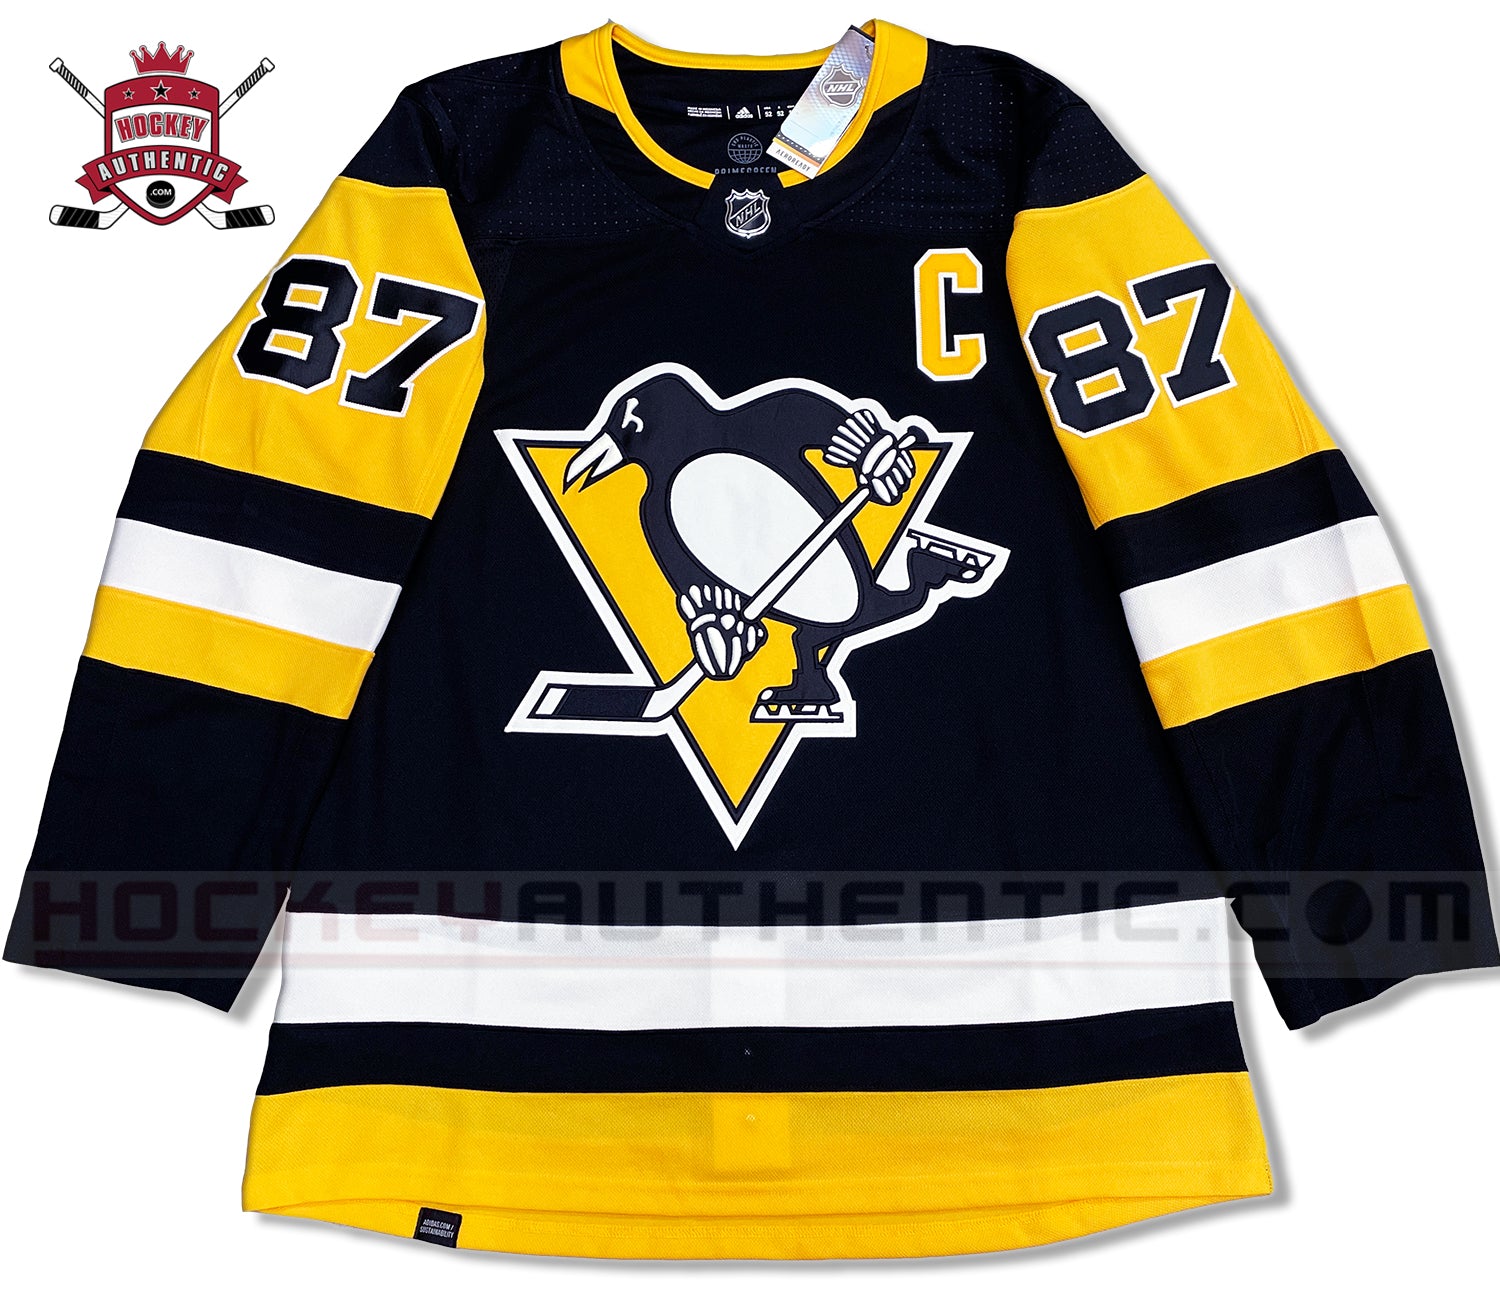 Sidney Crosby Jersey - Pittsburgh Penguins